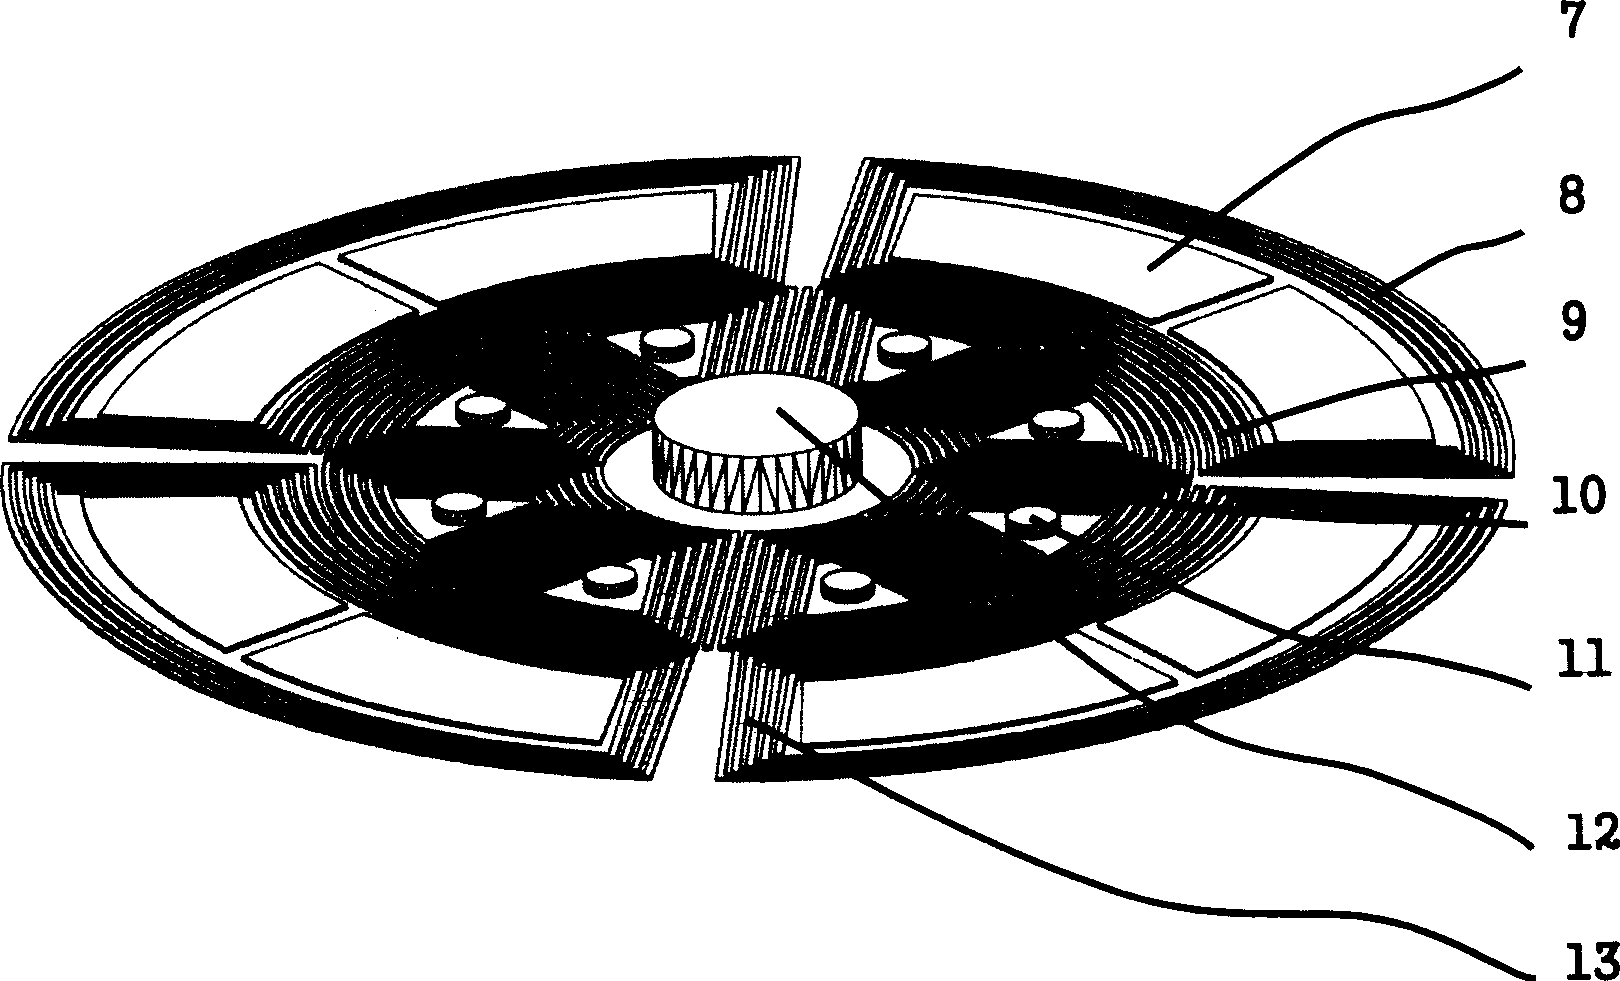 Micro-rotation top with double-stator electromagnetic suspension rotor